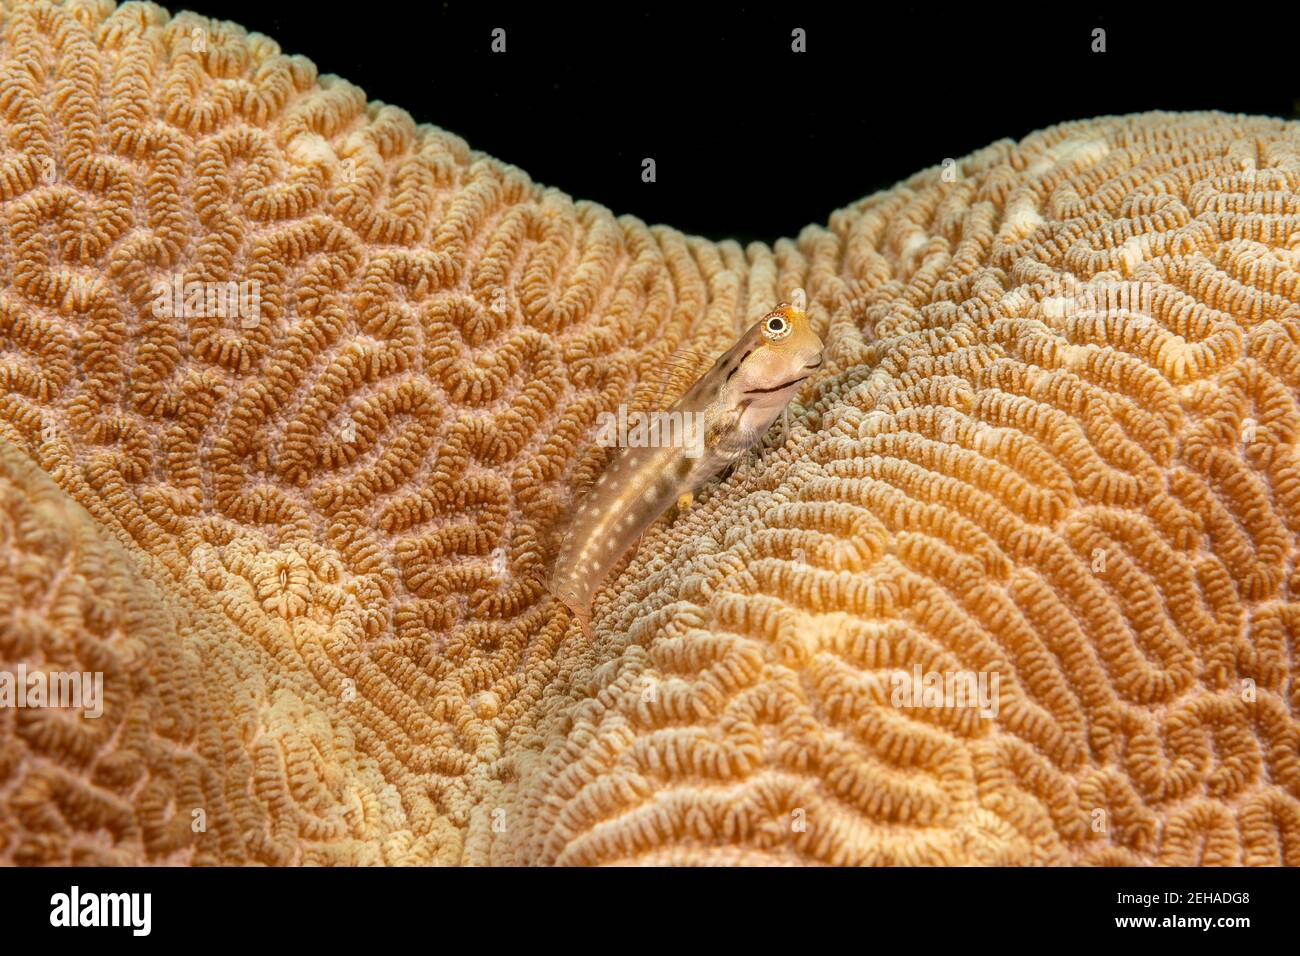 This Yaeyama coralblenny, Ecsenius yaeyamaensis, is perched on the convoluted surface of a hard coral off the island of Yap, Federated States of Micro Stock Photo